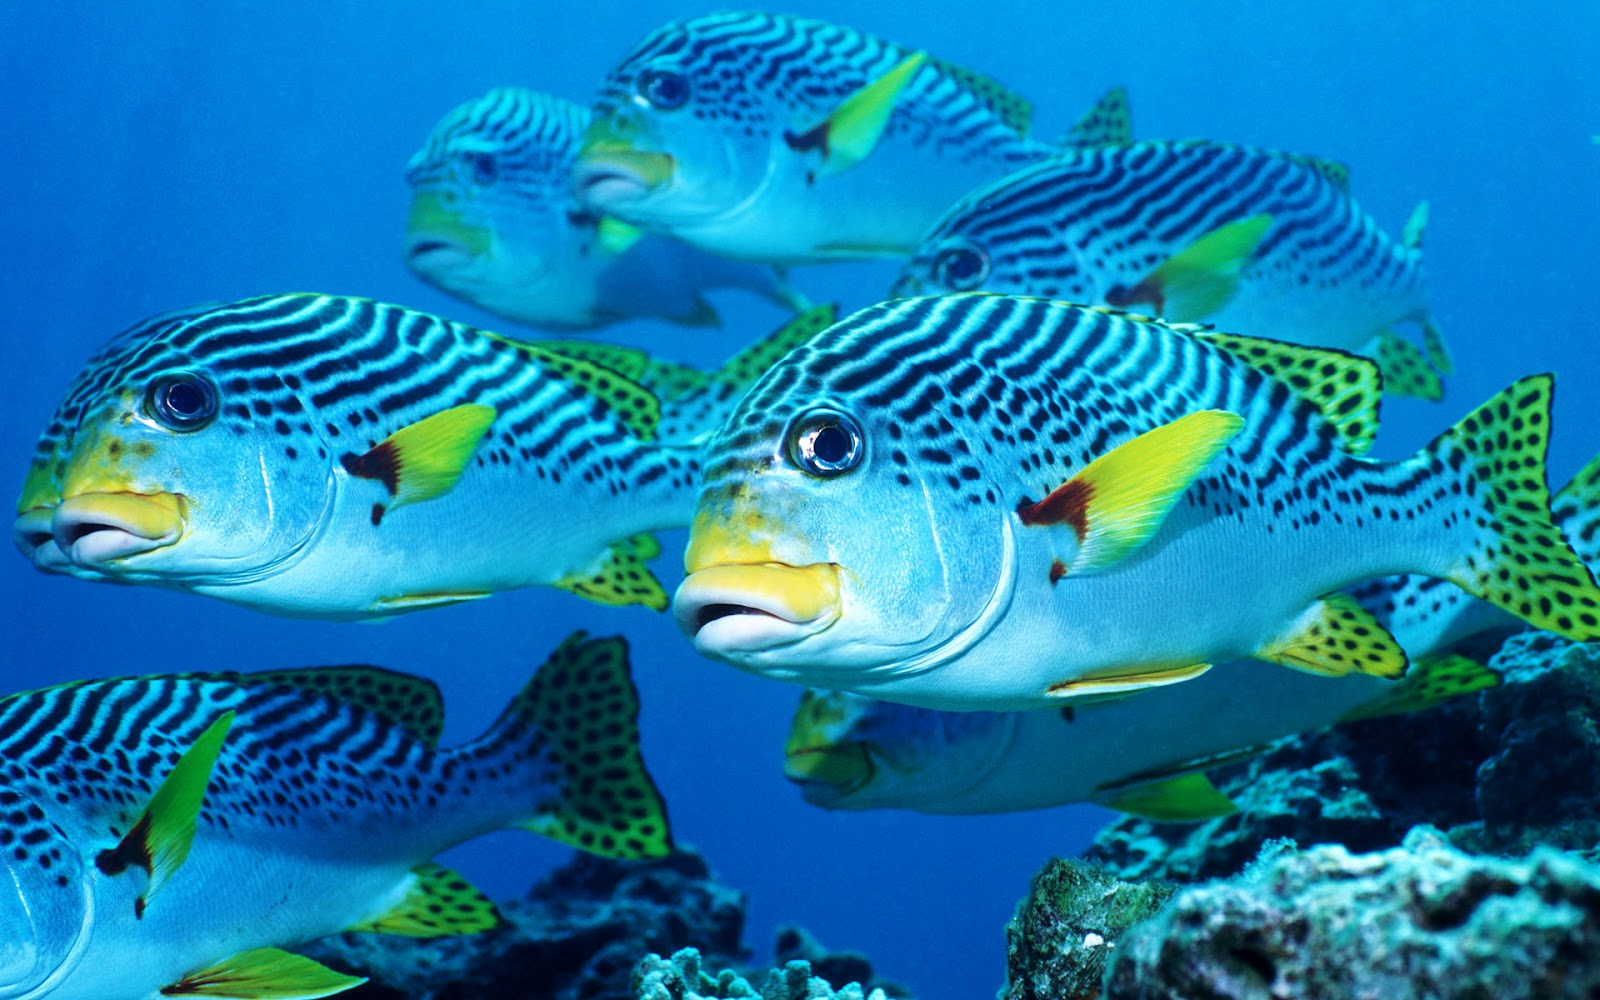 Ocean Life Wallpaper Marine On The Seabed Like Fish Plants